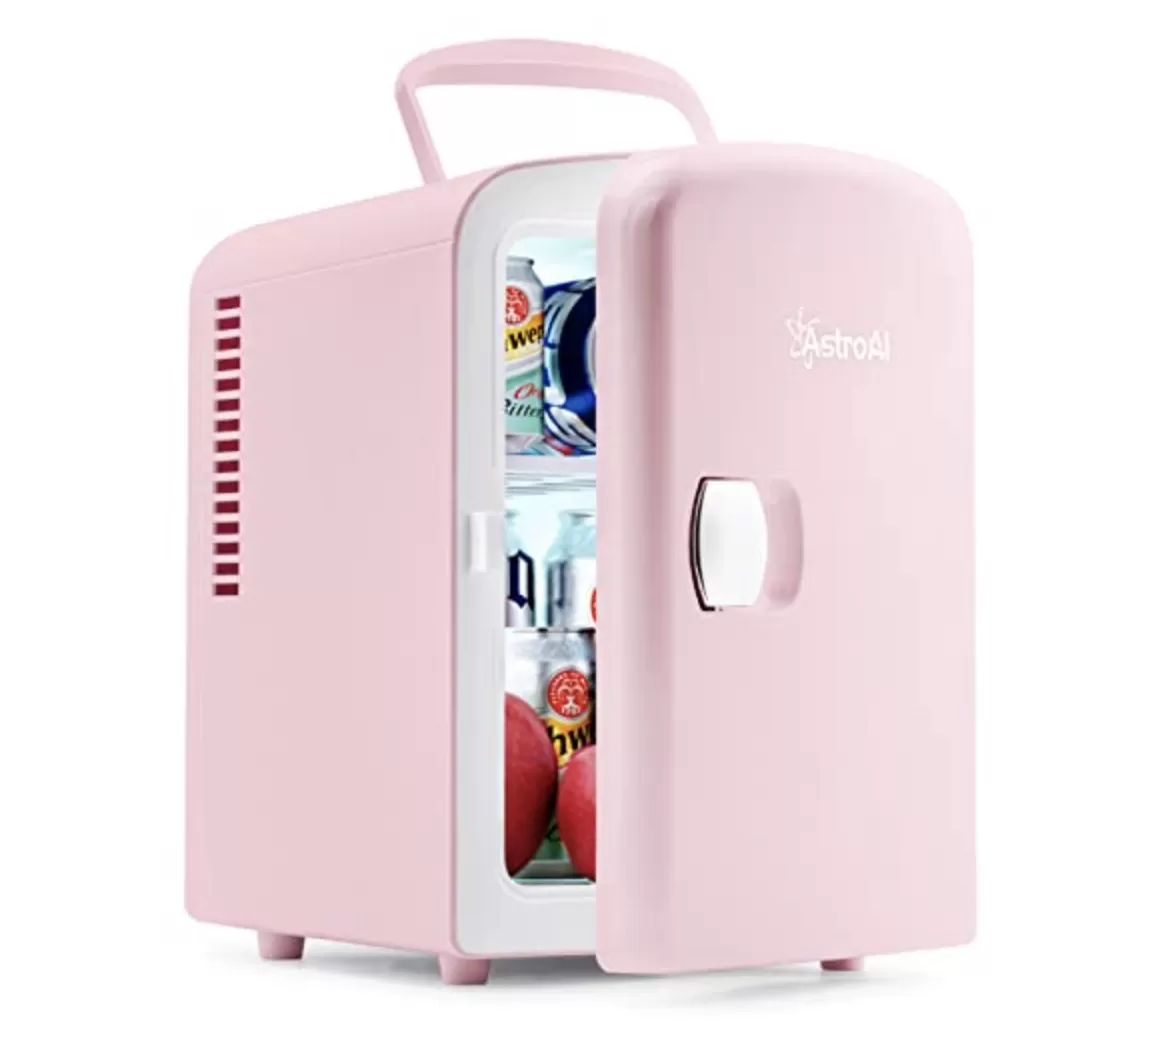 Household small refrigerator, have you already used it?